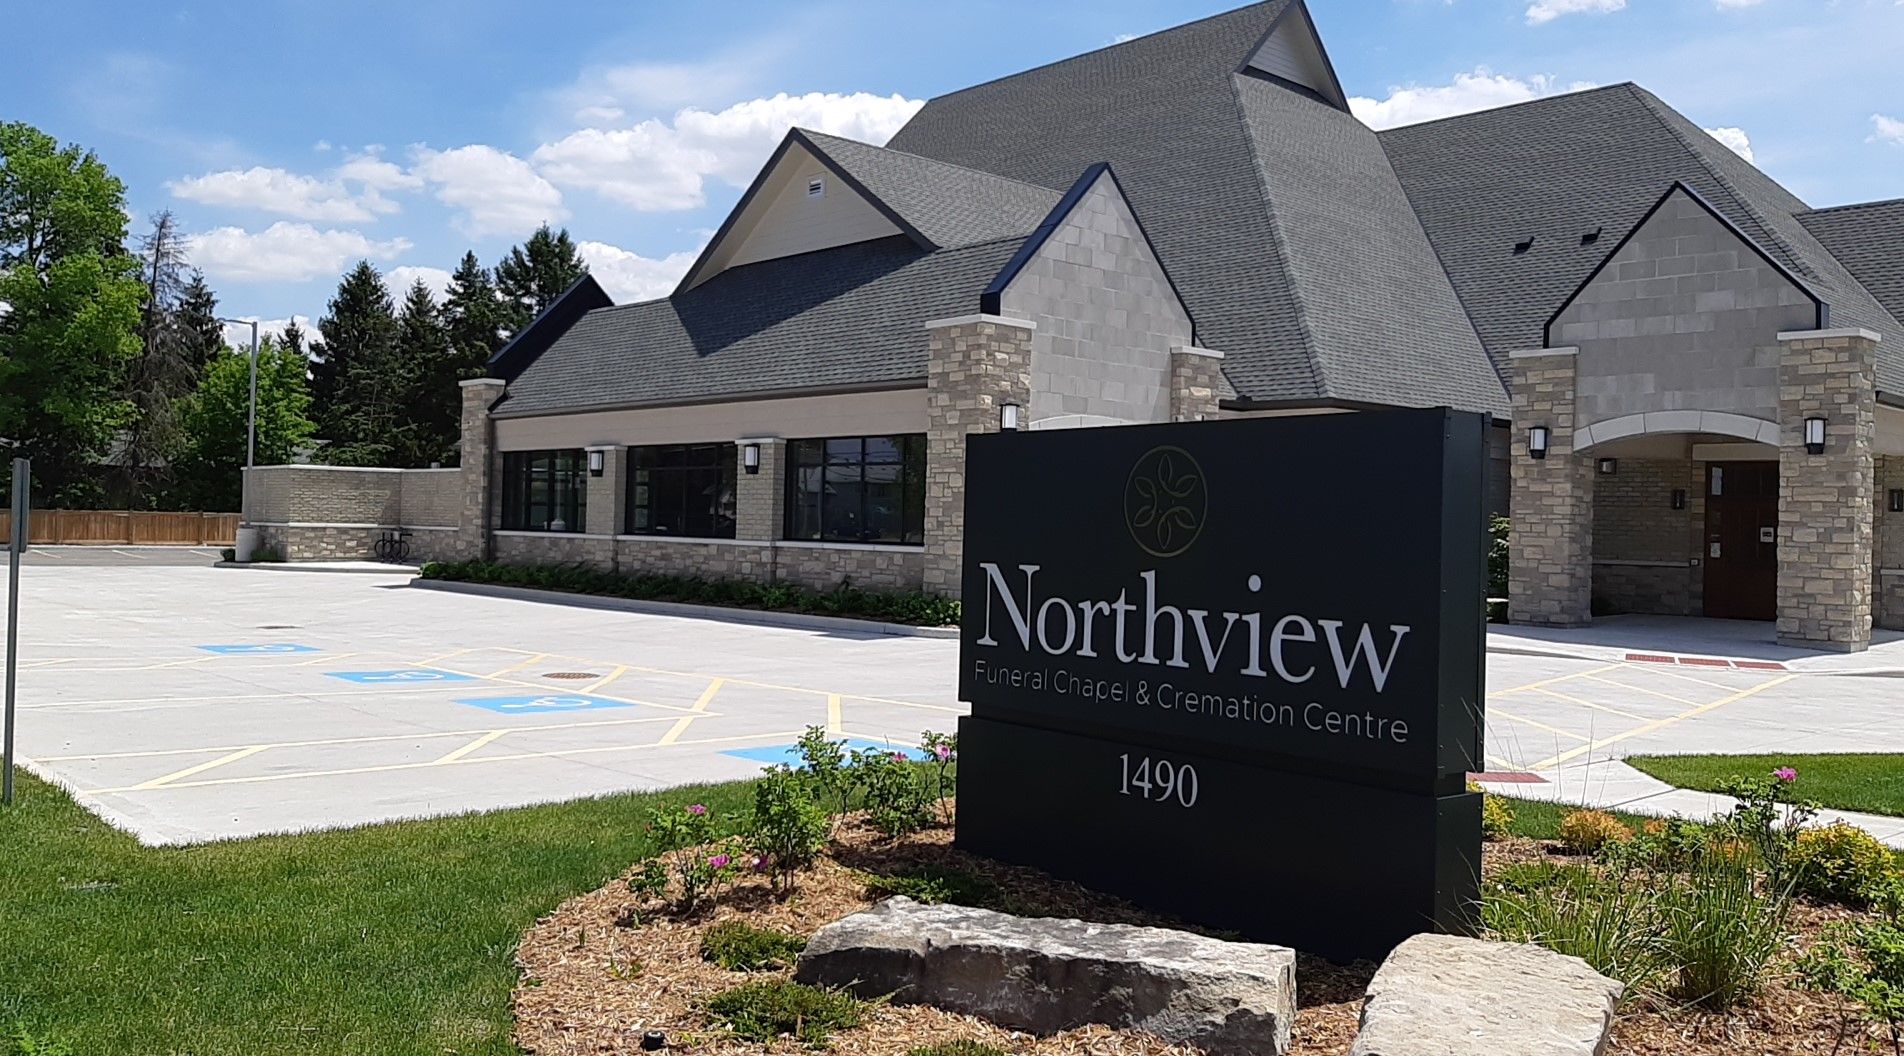 Exterior of a funeral home with bricks walls and the visible Northview sign at the entrance.